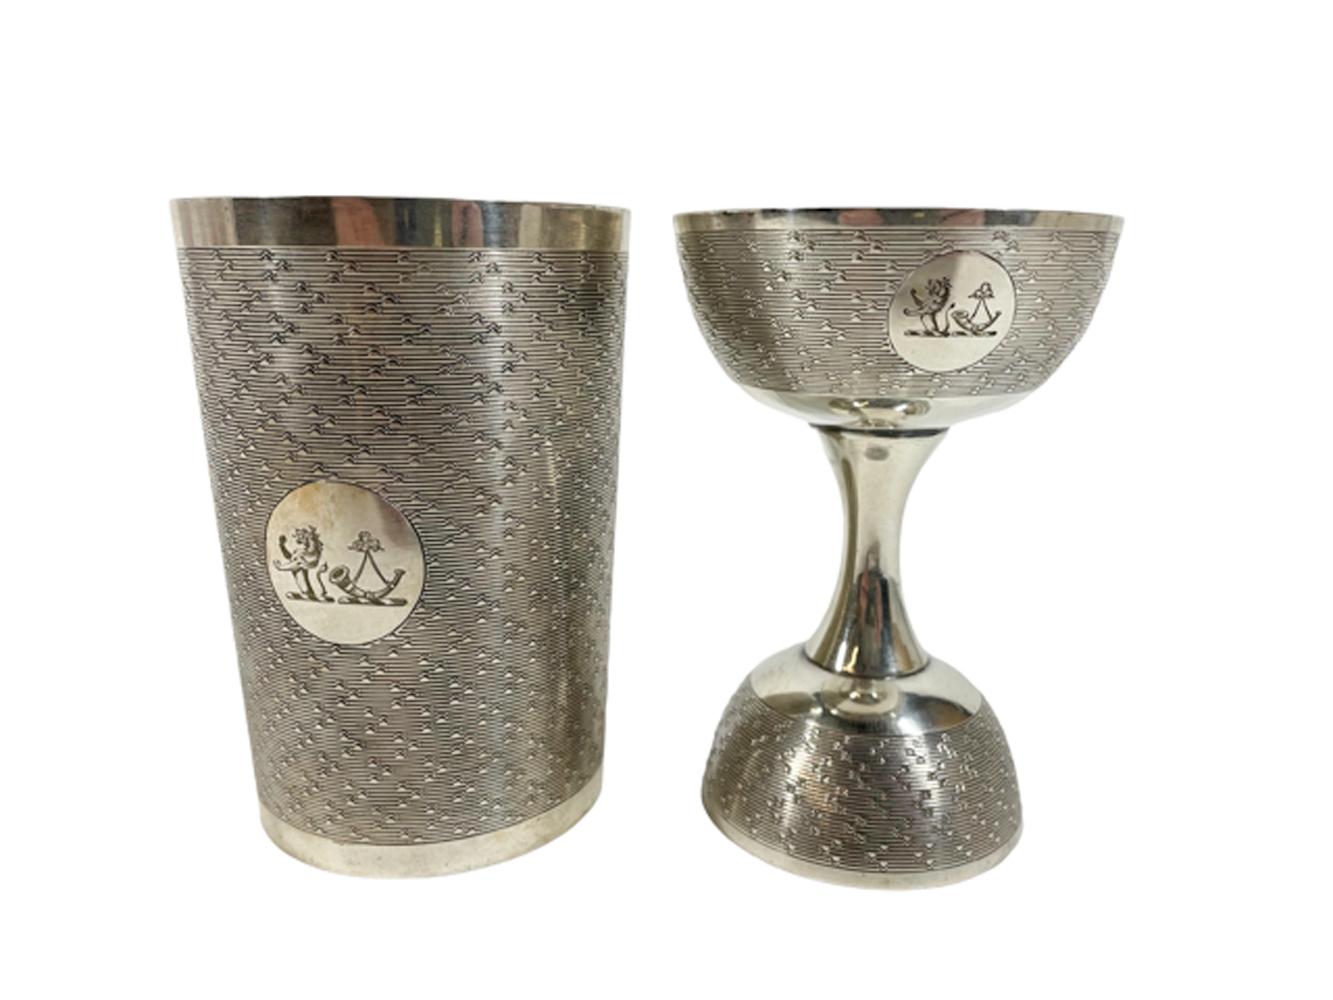 Silver plate double jigger / spirit measure and companion muddling cup. Each with a reserve engraver with a rampant lion and powder horn against an engine turned ground. The measure fits into the muddling cup for storage. Marked under a 